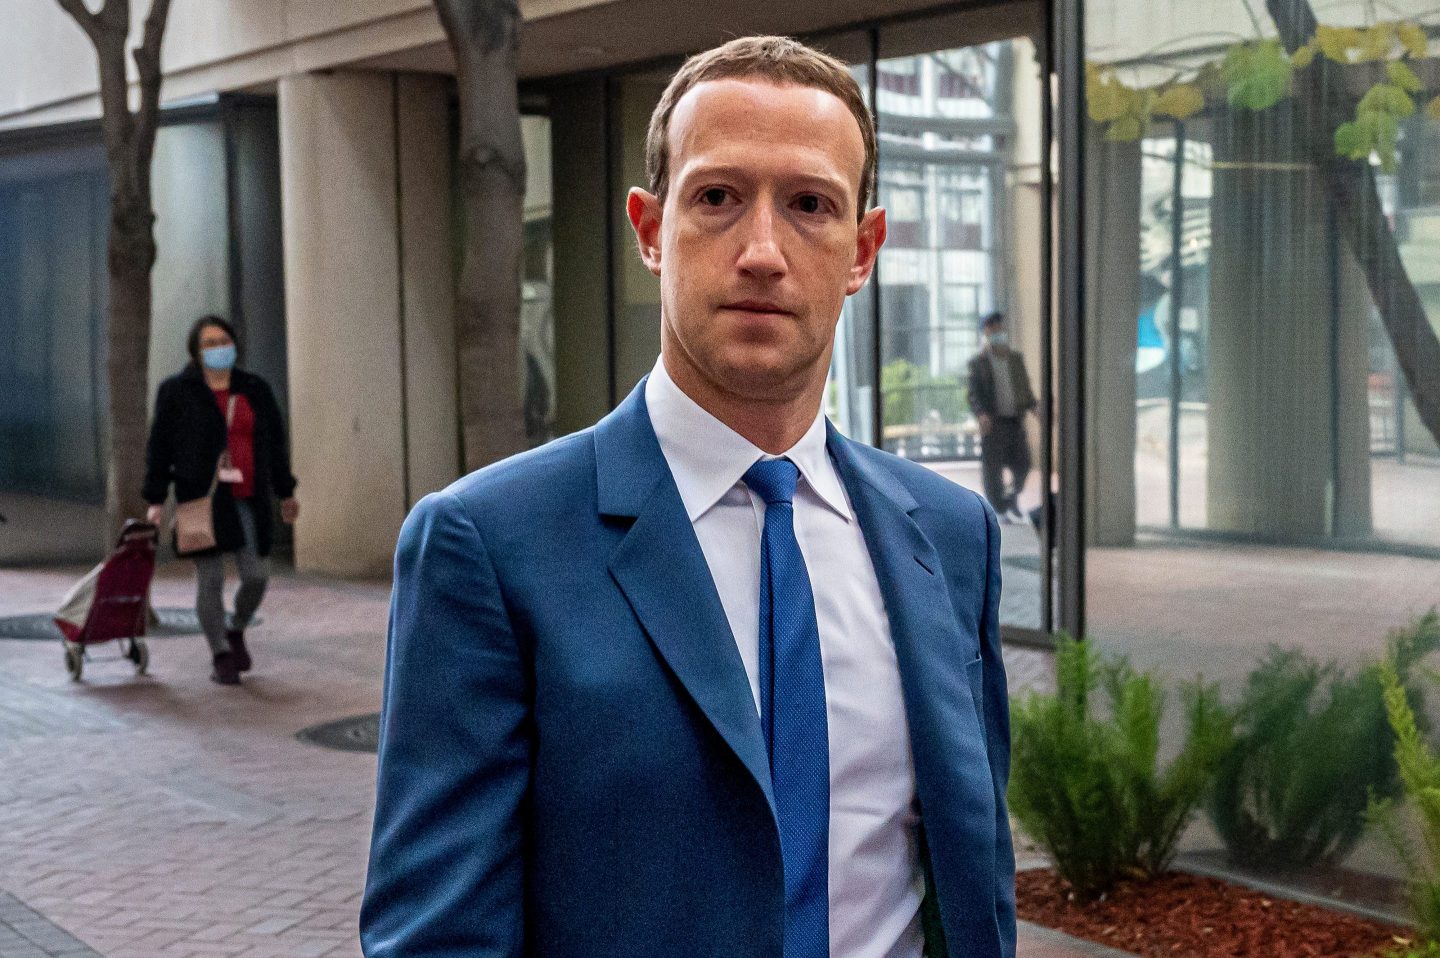 Mark Zuckerberg, chief executive officer of Meta Platforms Inc., arrives at federal court in San Jose, California, US, on Tuesday, Dec. 20, 2022.